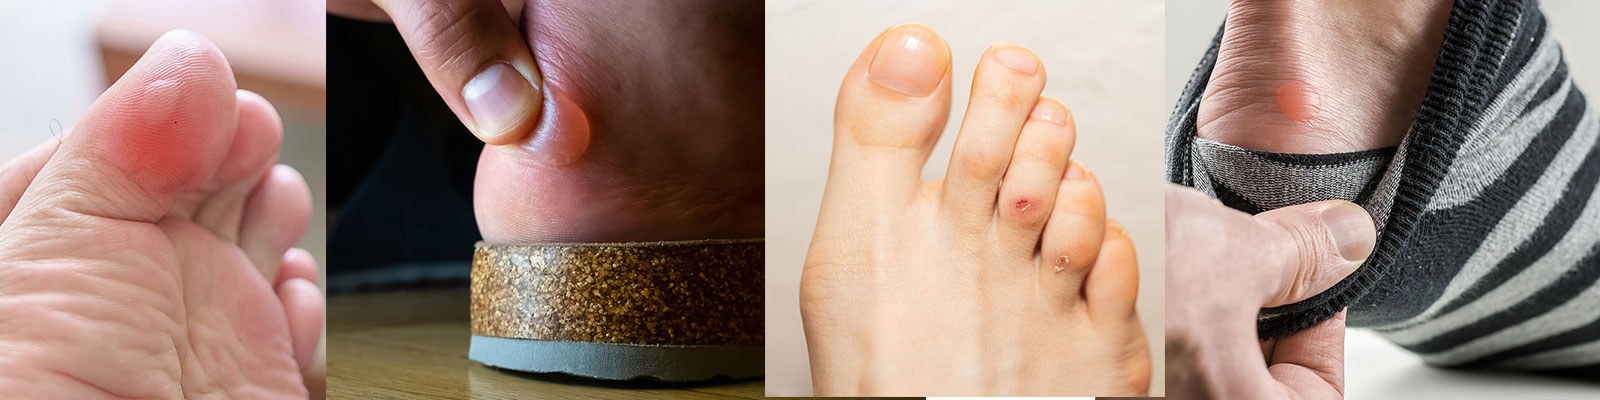 Different types of blisters can form from tight fitting shoes.